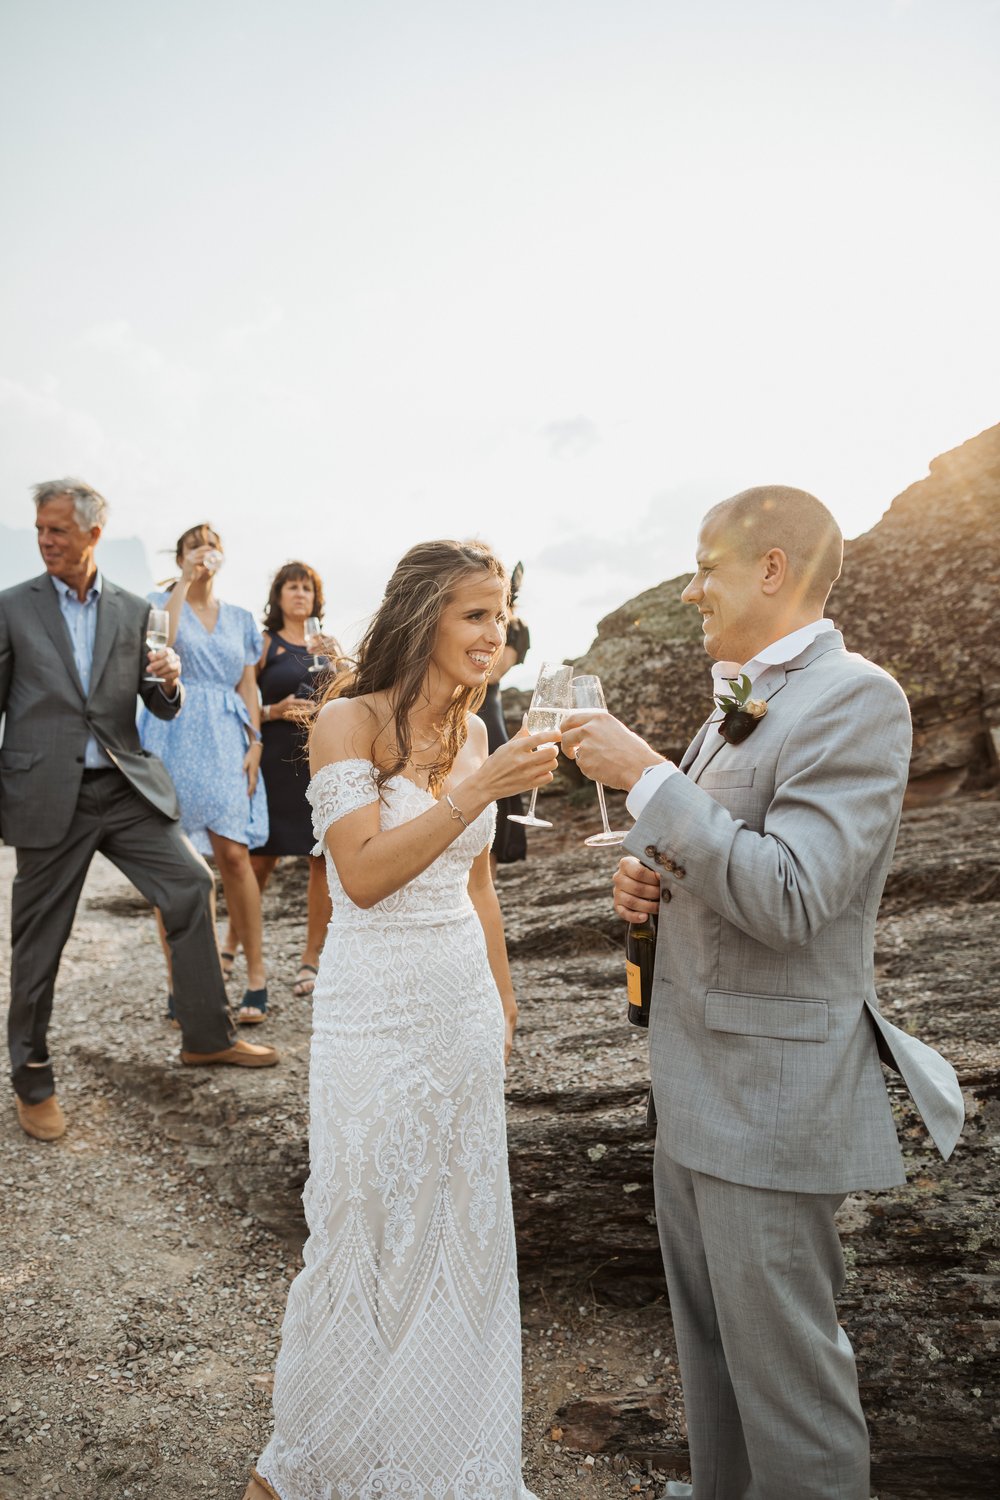 Bride and groom toast their glasses of champagne with their guests behind them